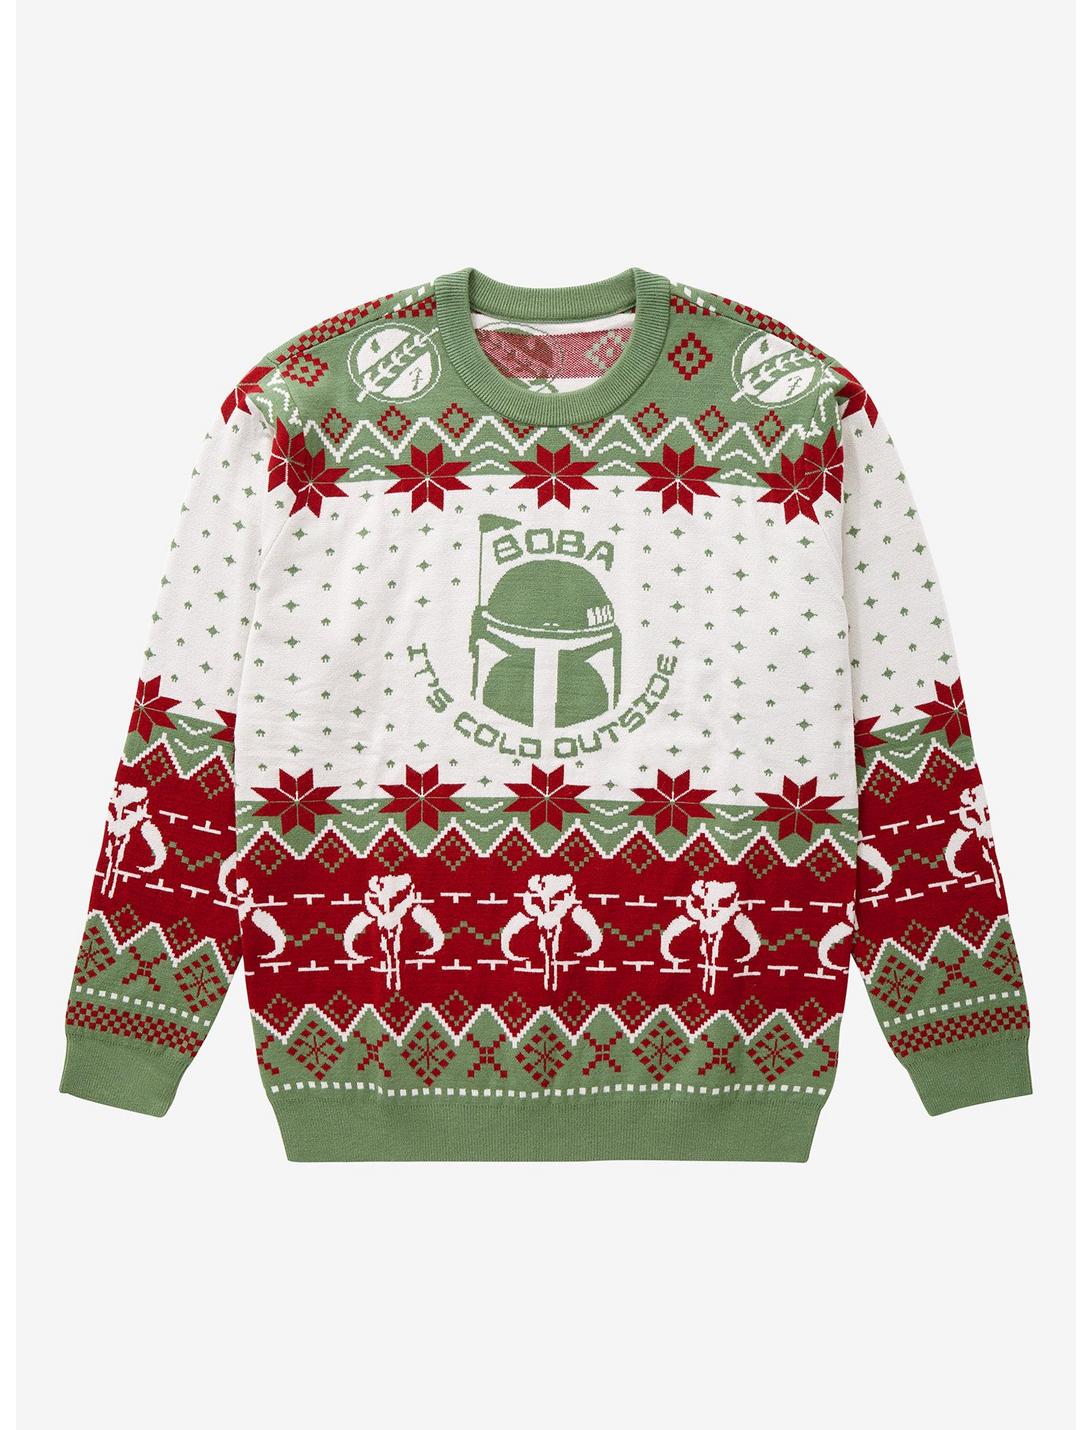 Our Universe Star Wars Boba Fett Boba It's Cold Outside Holiday Sweater, MULTI, hi-res